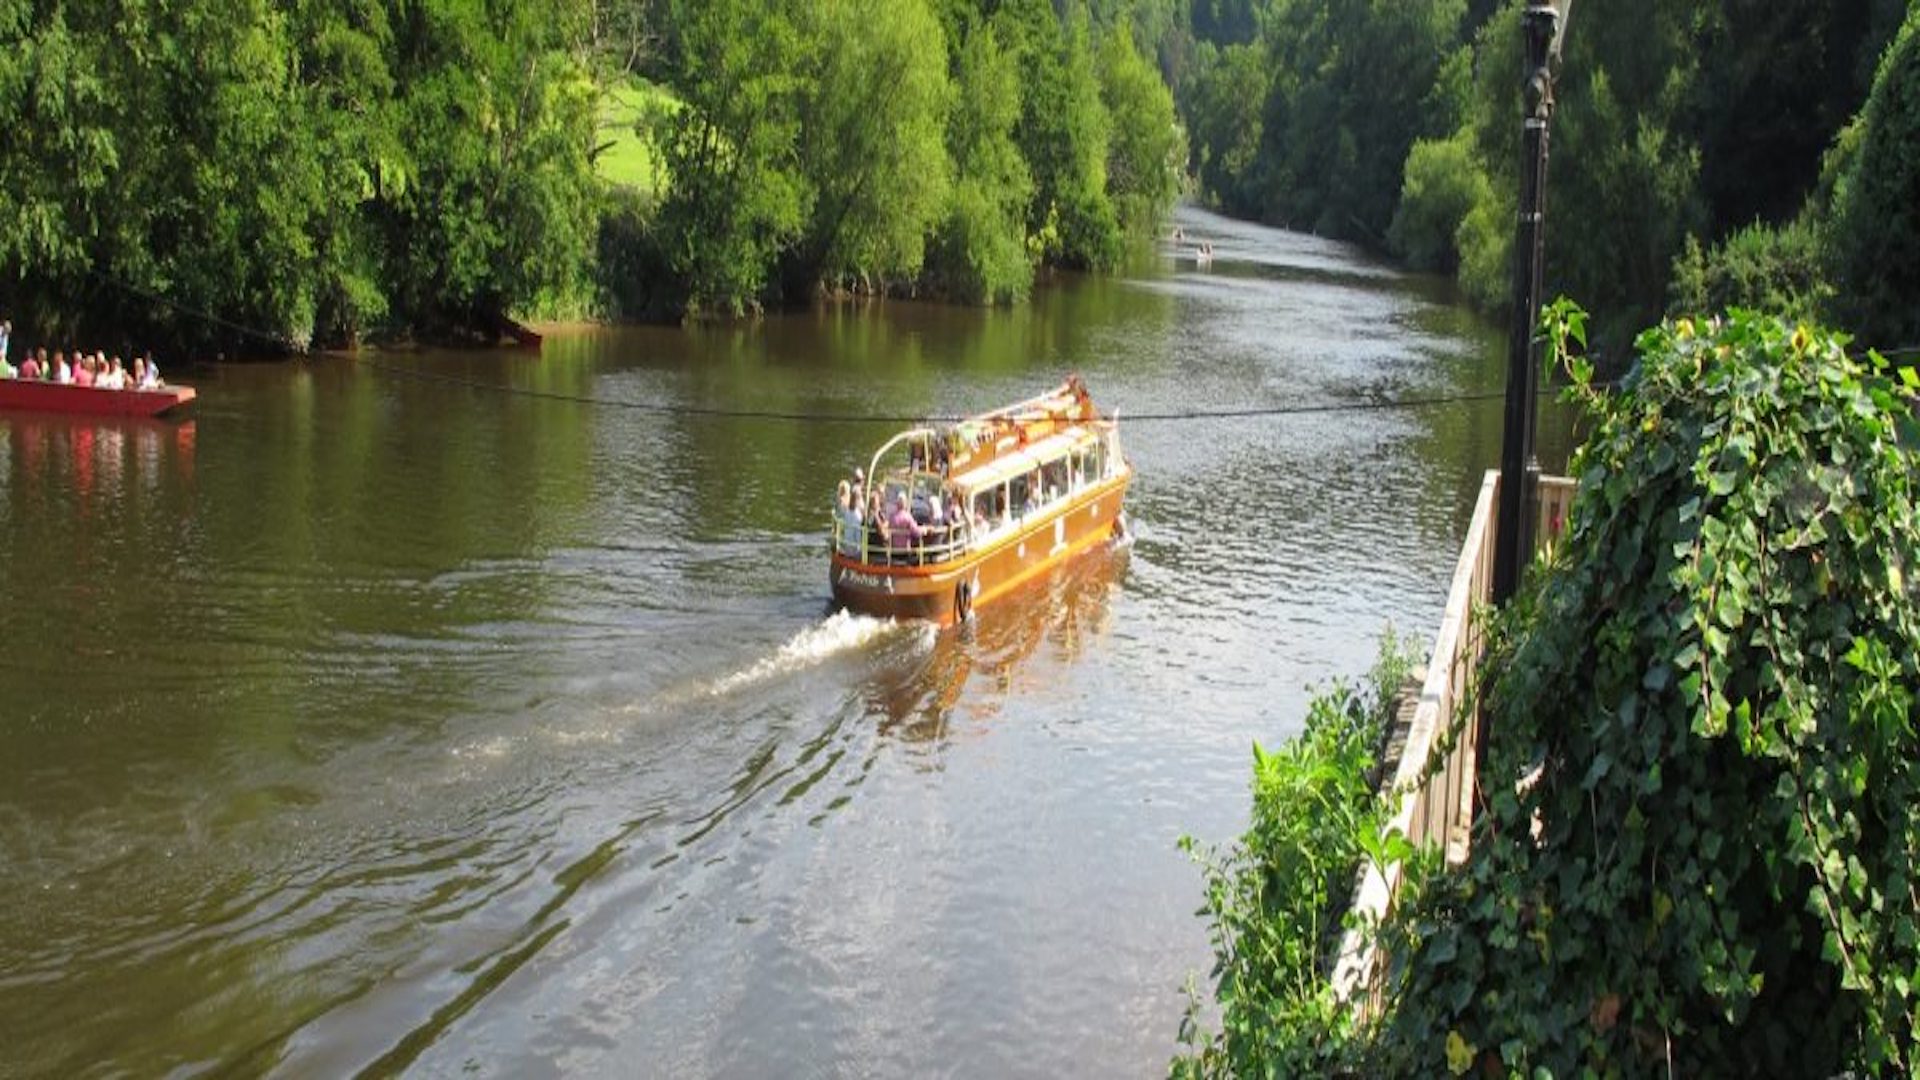 A pleasure boat sails slowly along a wide section of the River Wye in Herefordshire. Trees line both banks.